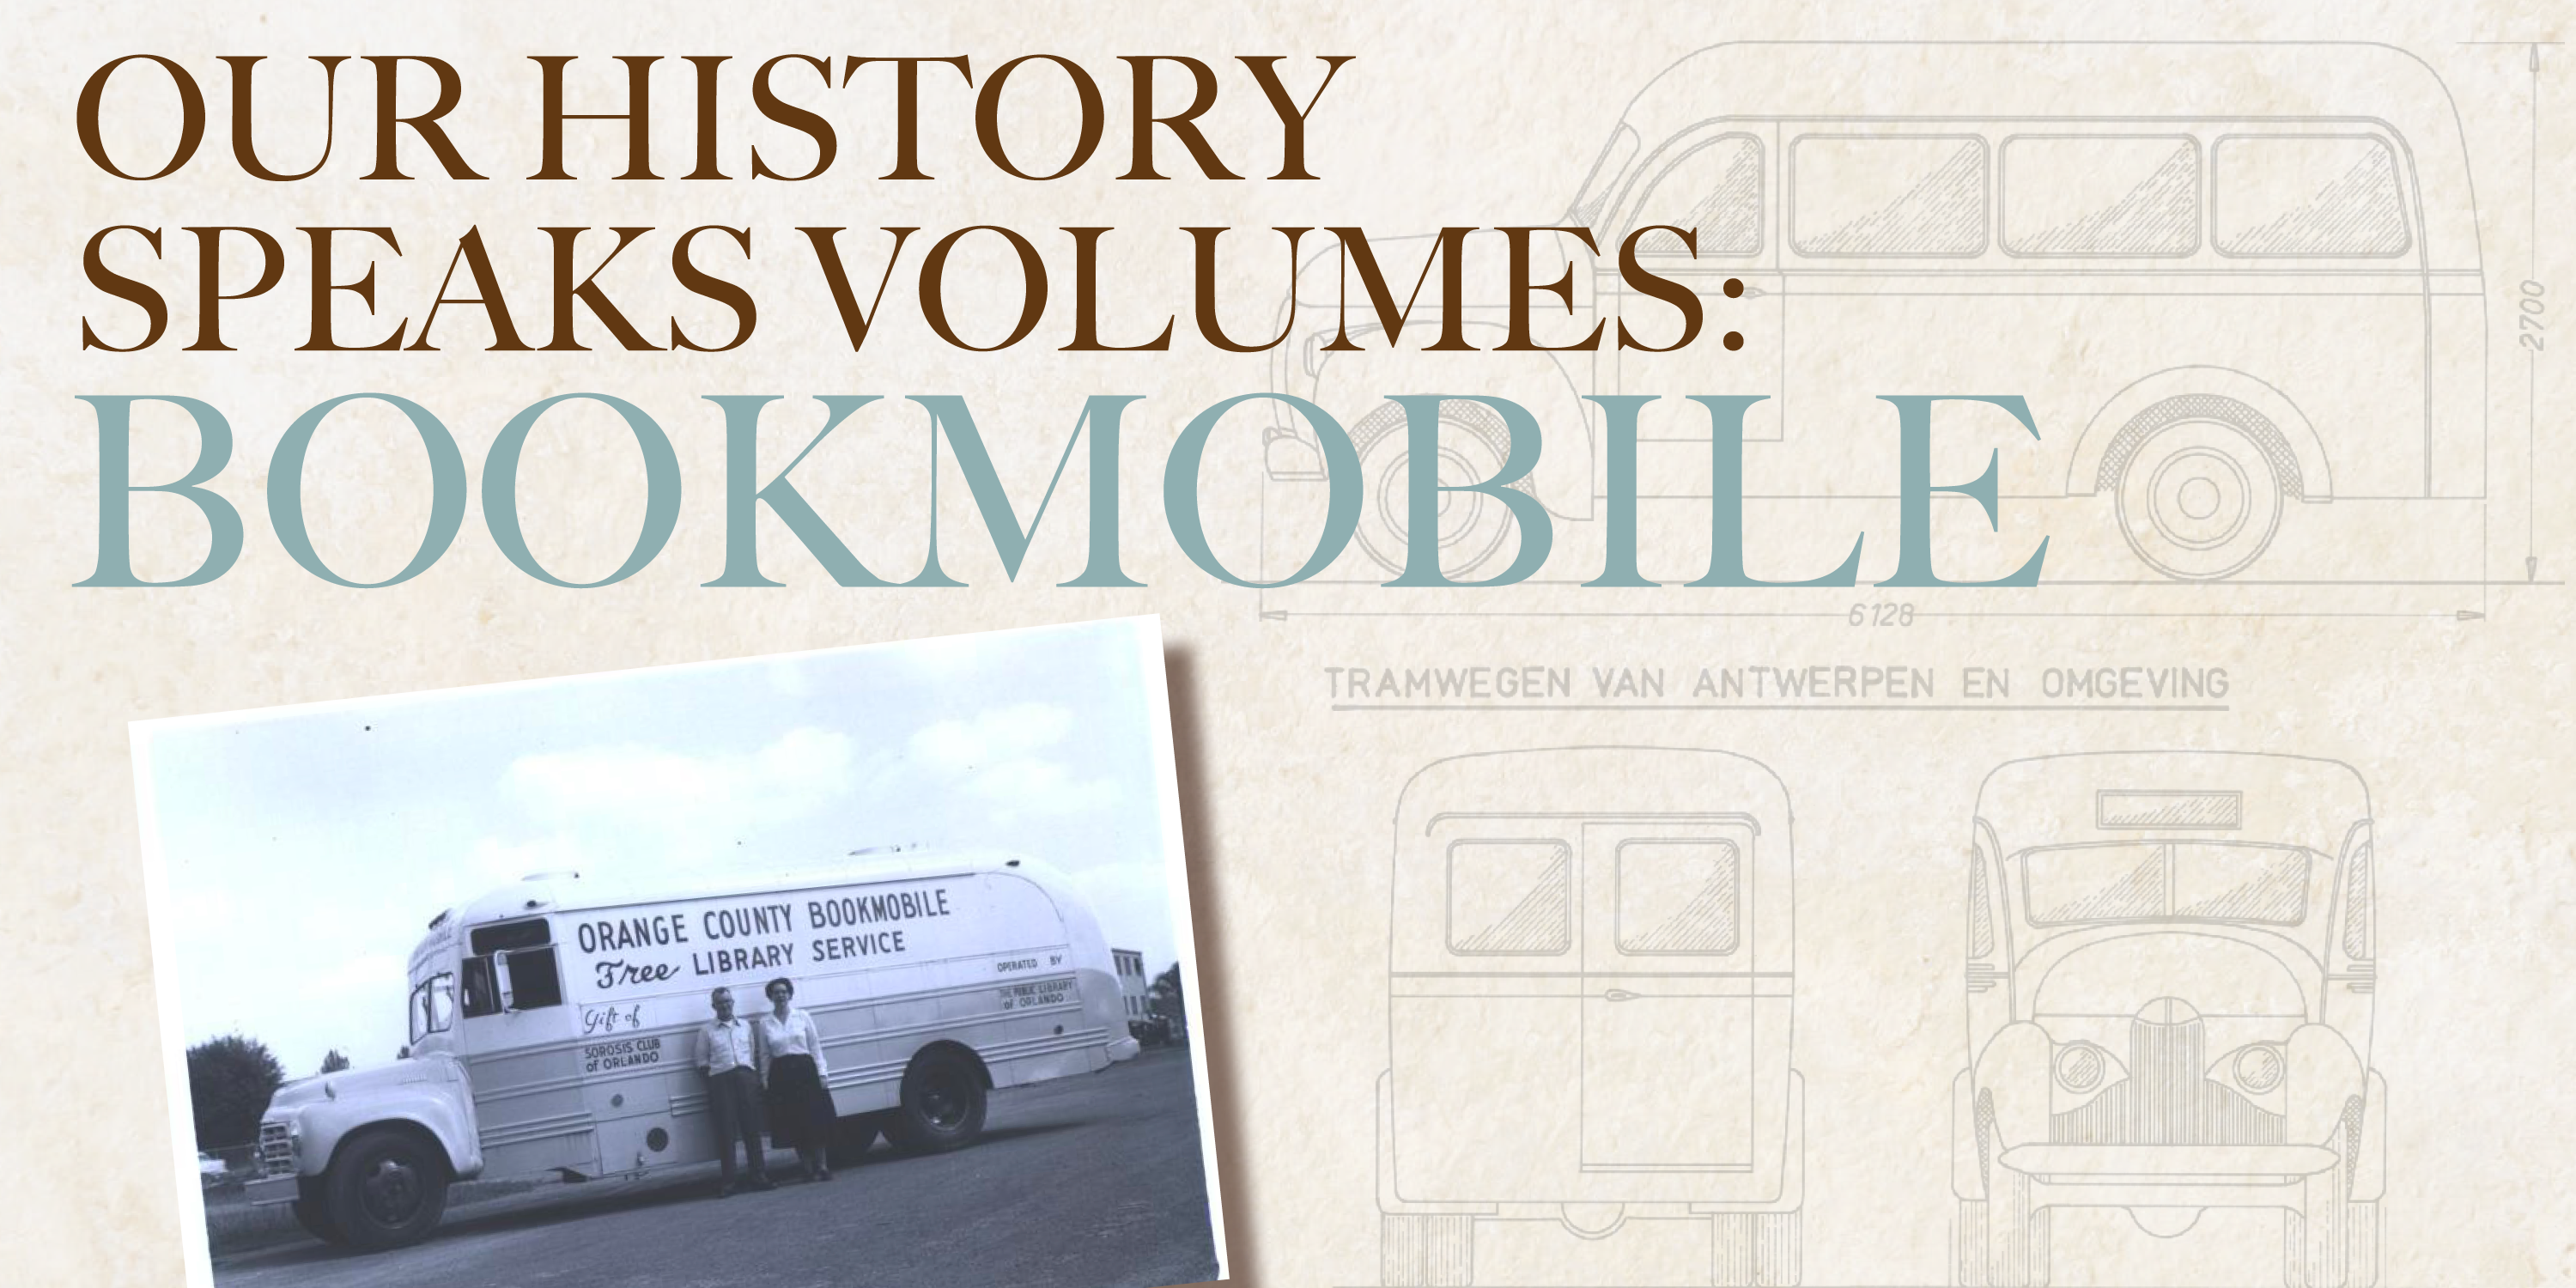 Our History Speaks Volumes: Bookmobile